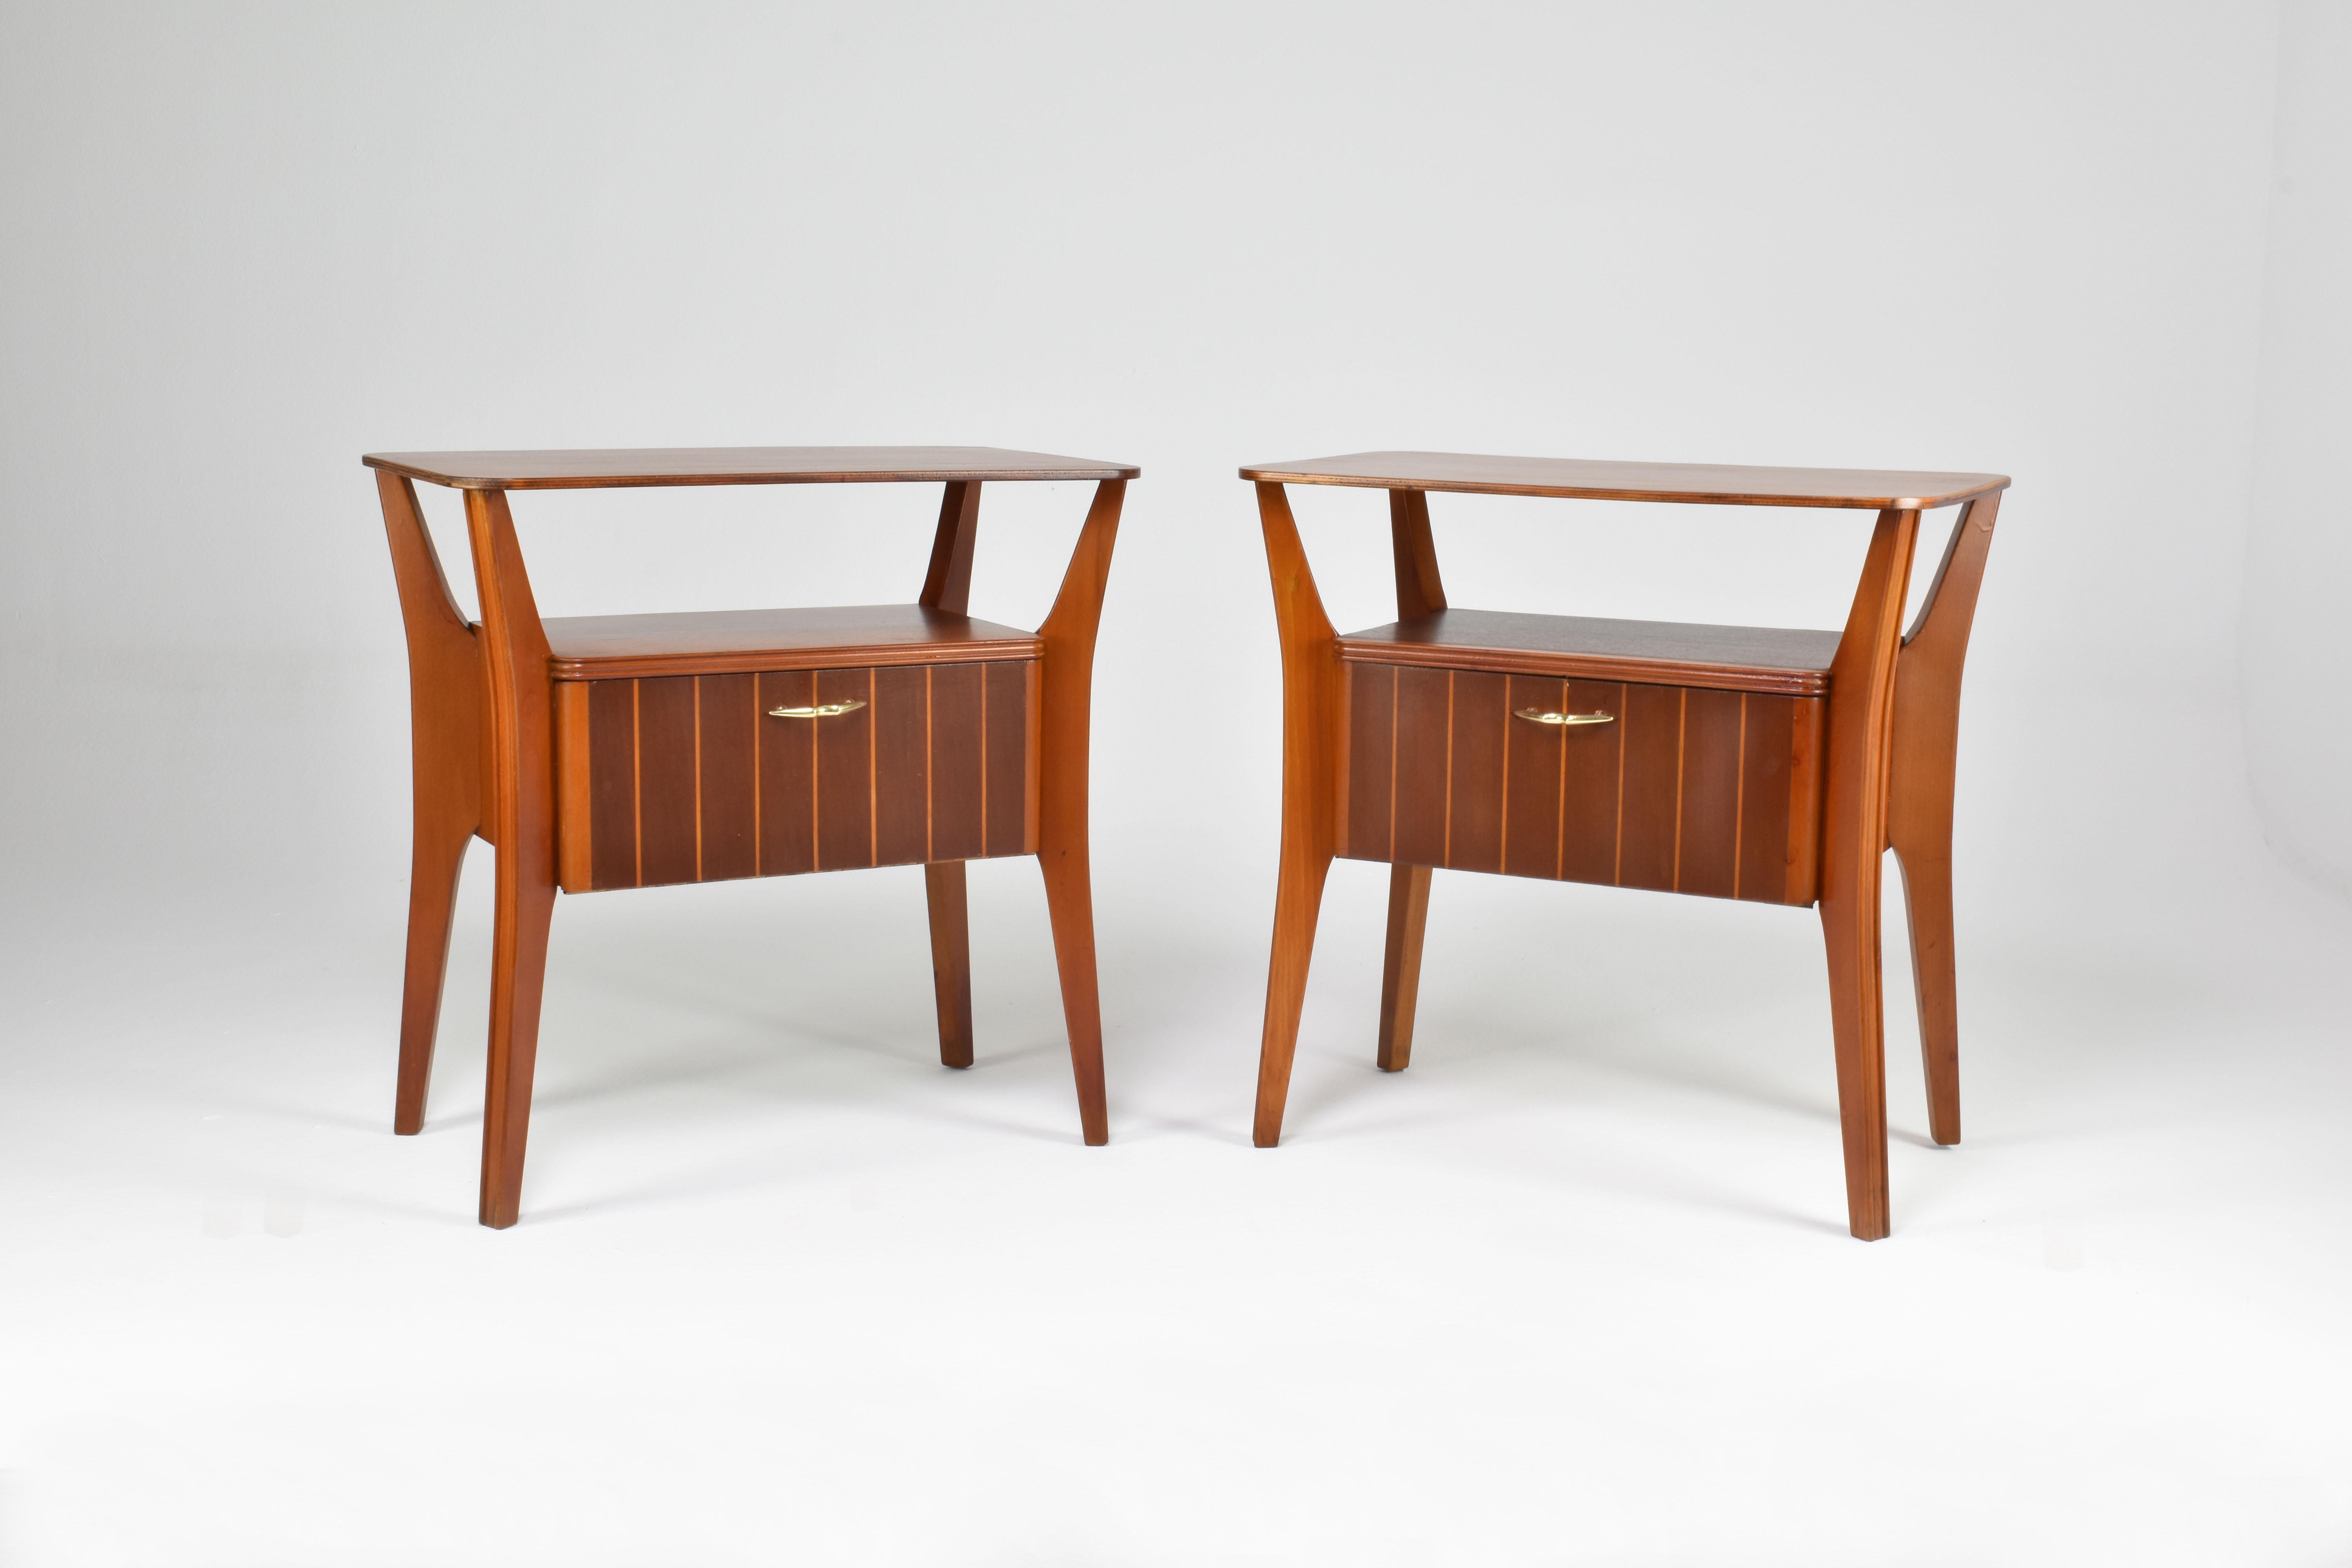 Pair of Italian Maple Nightstands Attributed to Gio Ponti for Cantu, 1950s For Sale 2